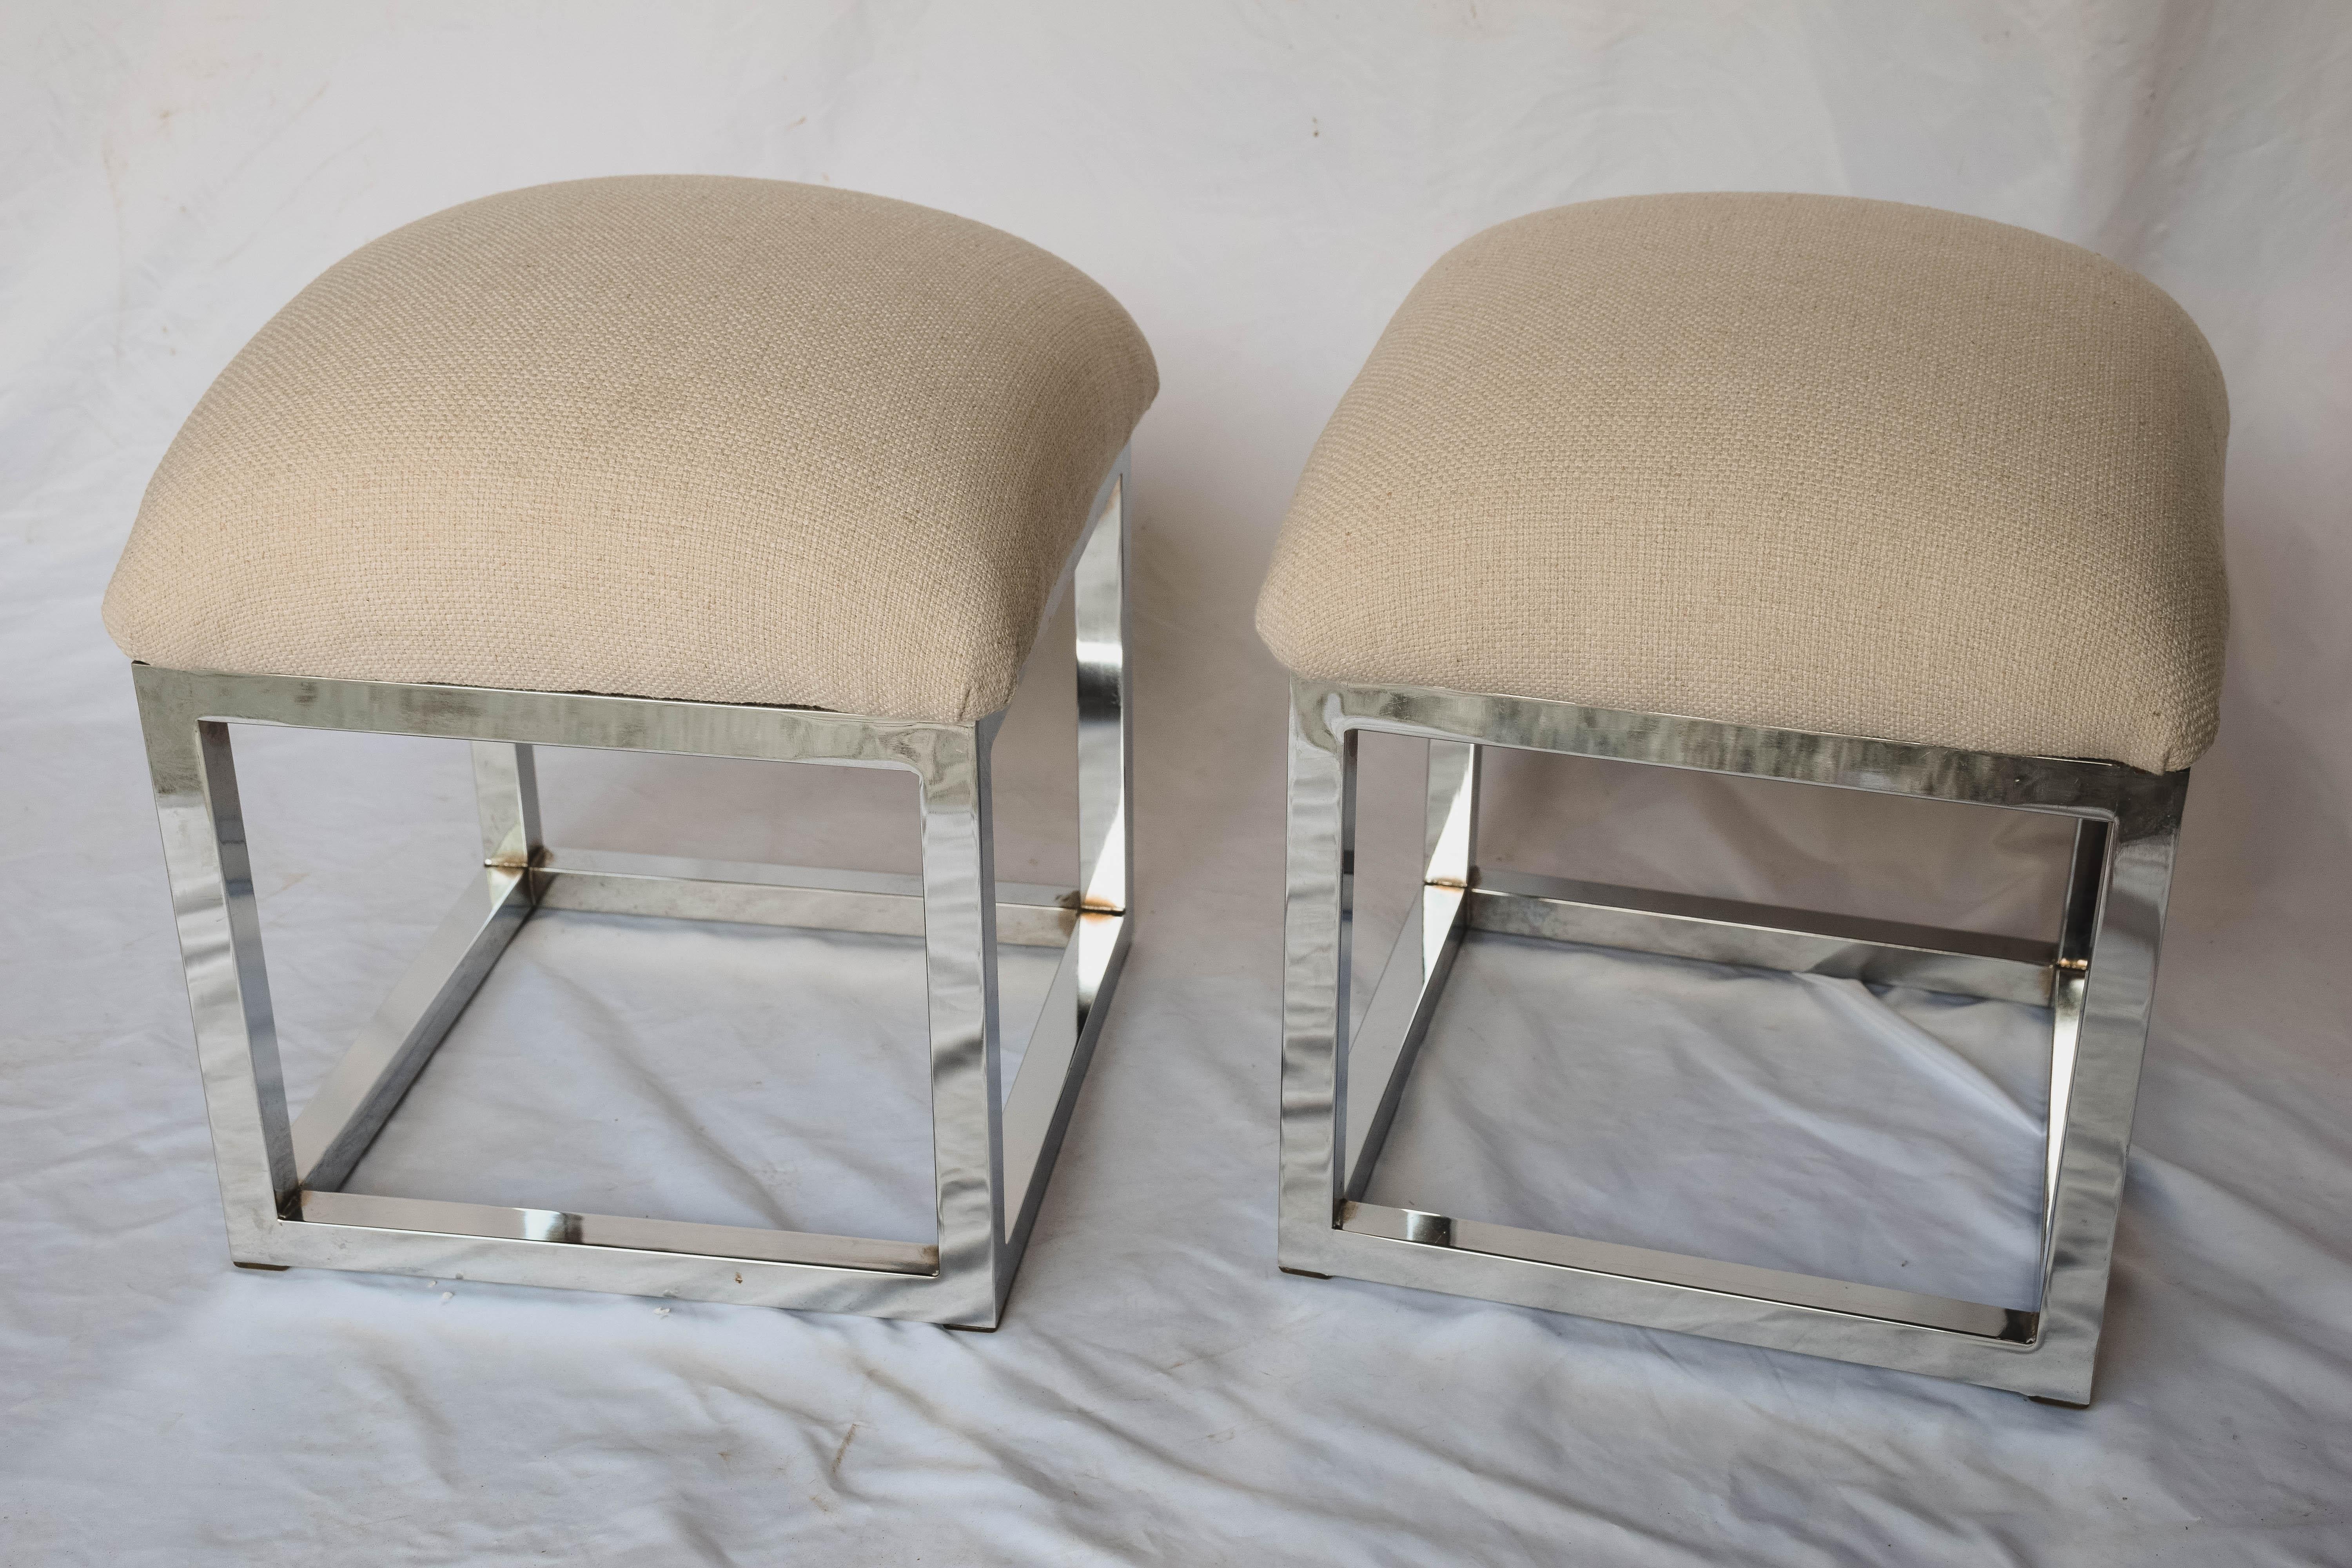 20th Century Pair of Mid-Century Modern Cube Chrome Ottomans Attributed to Milo Baughman